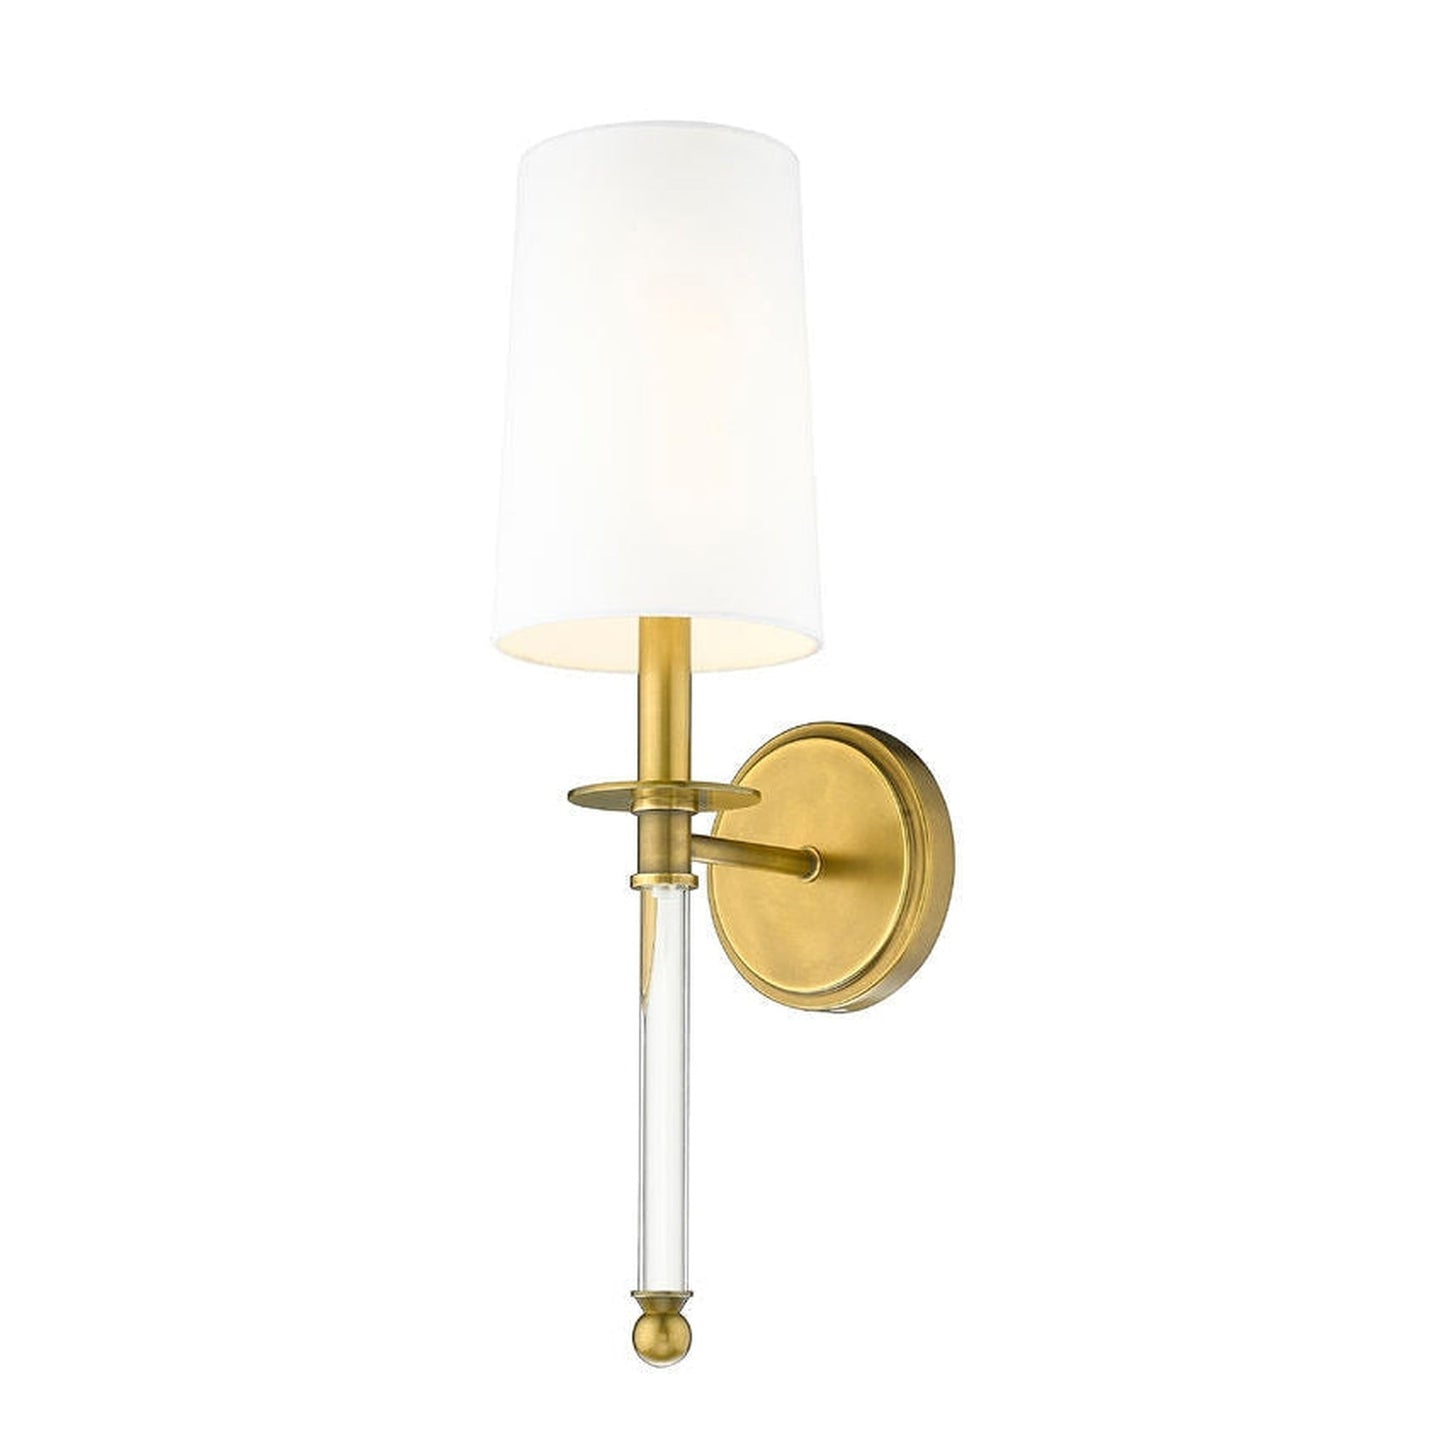 Z-Lite Mila 6" 1-Light Rubbed Brass Wall Sconce With White Fabric Shade